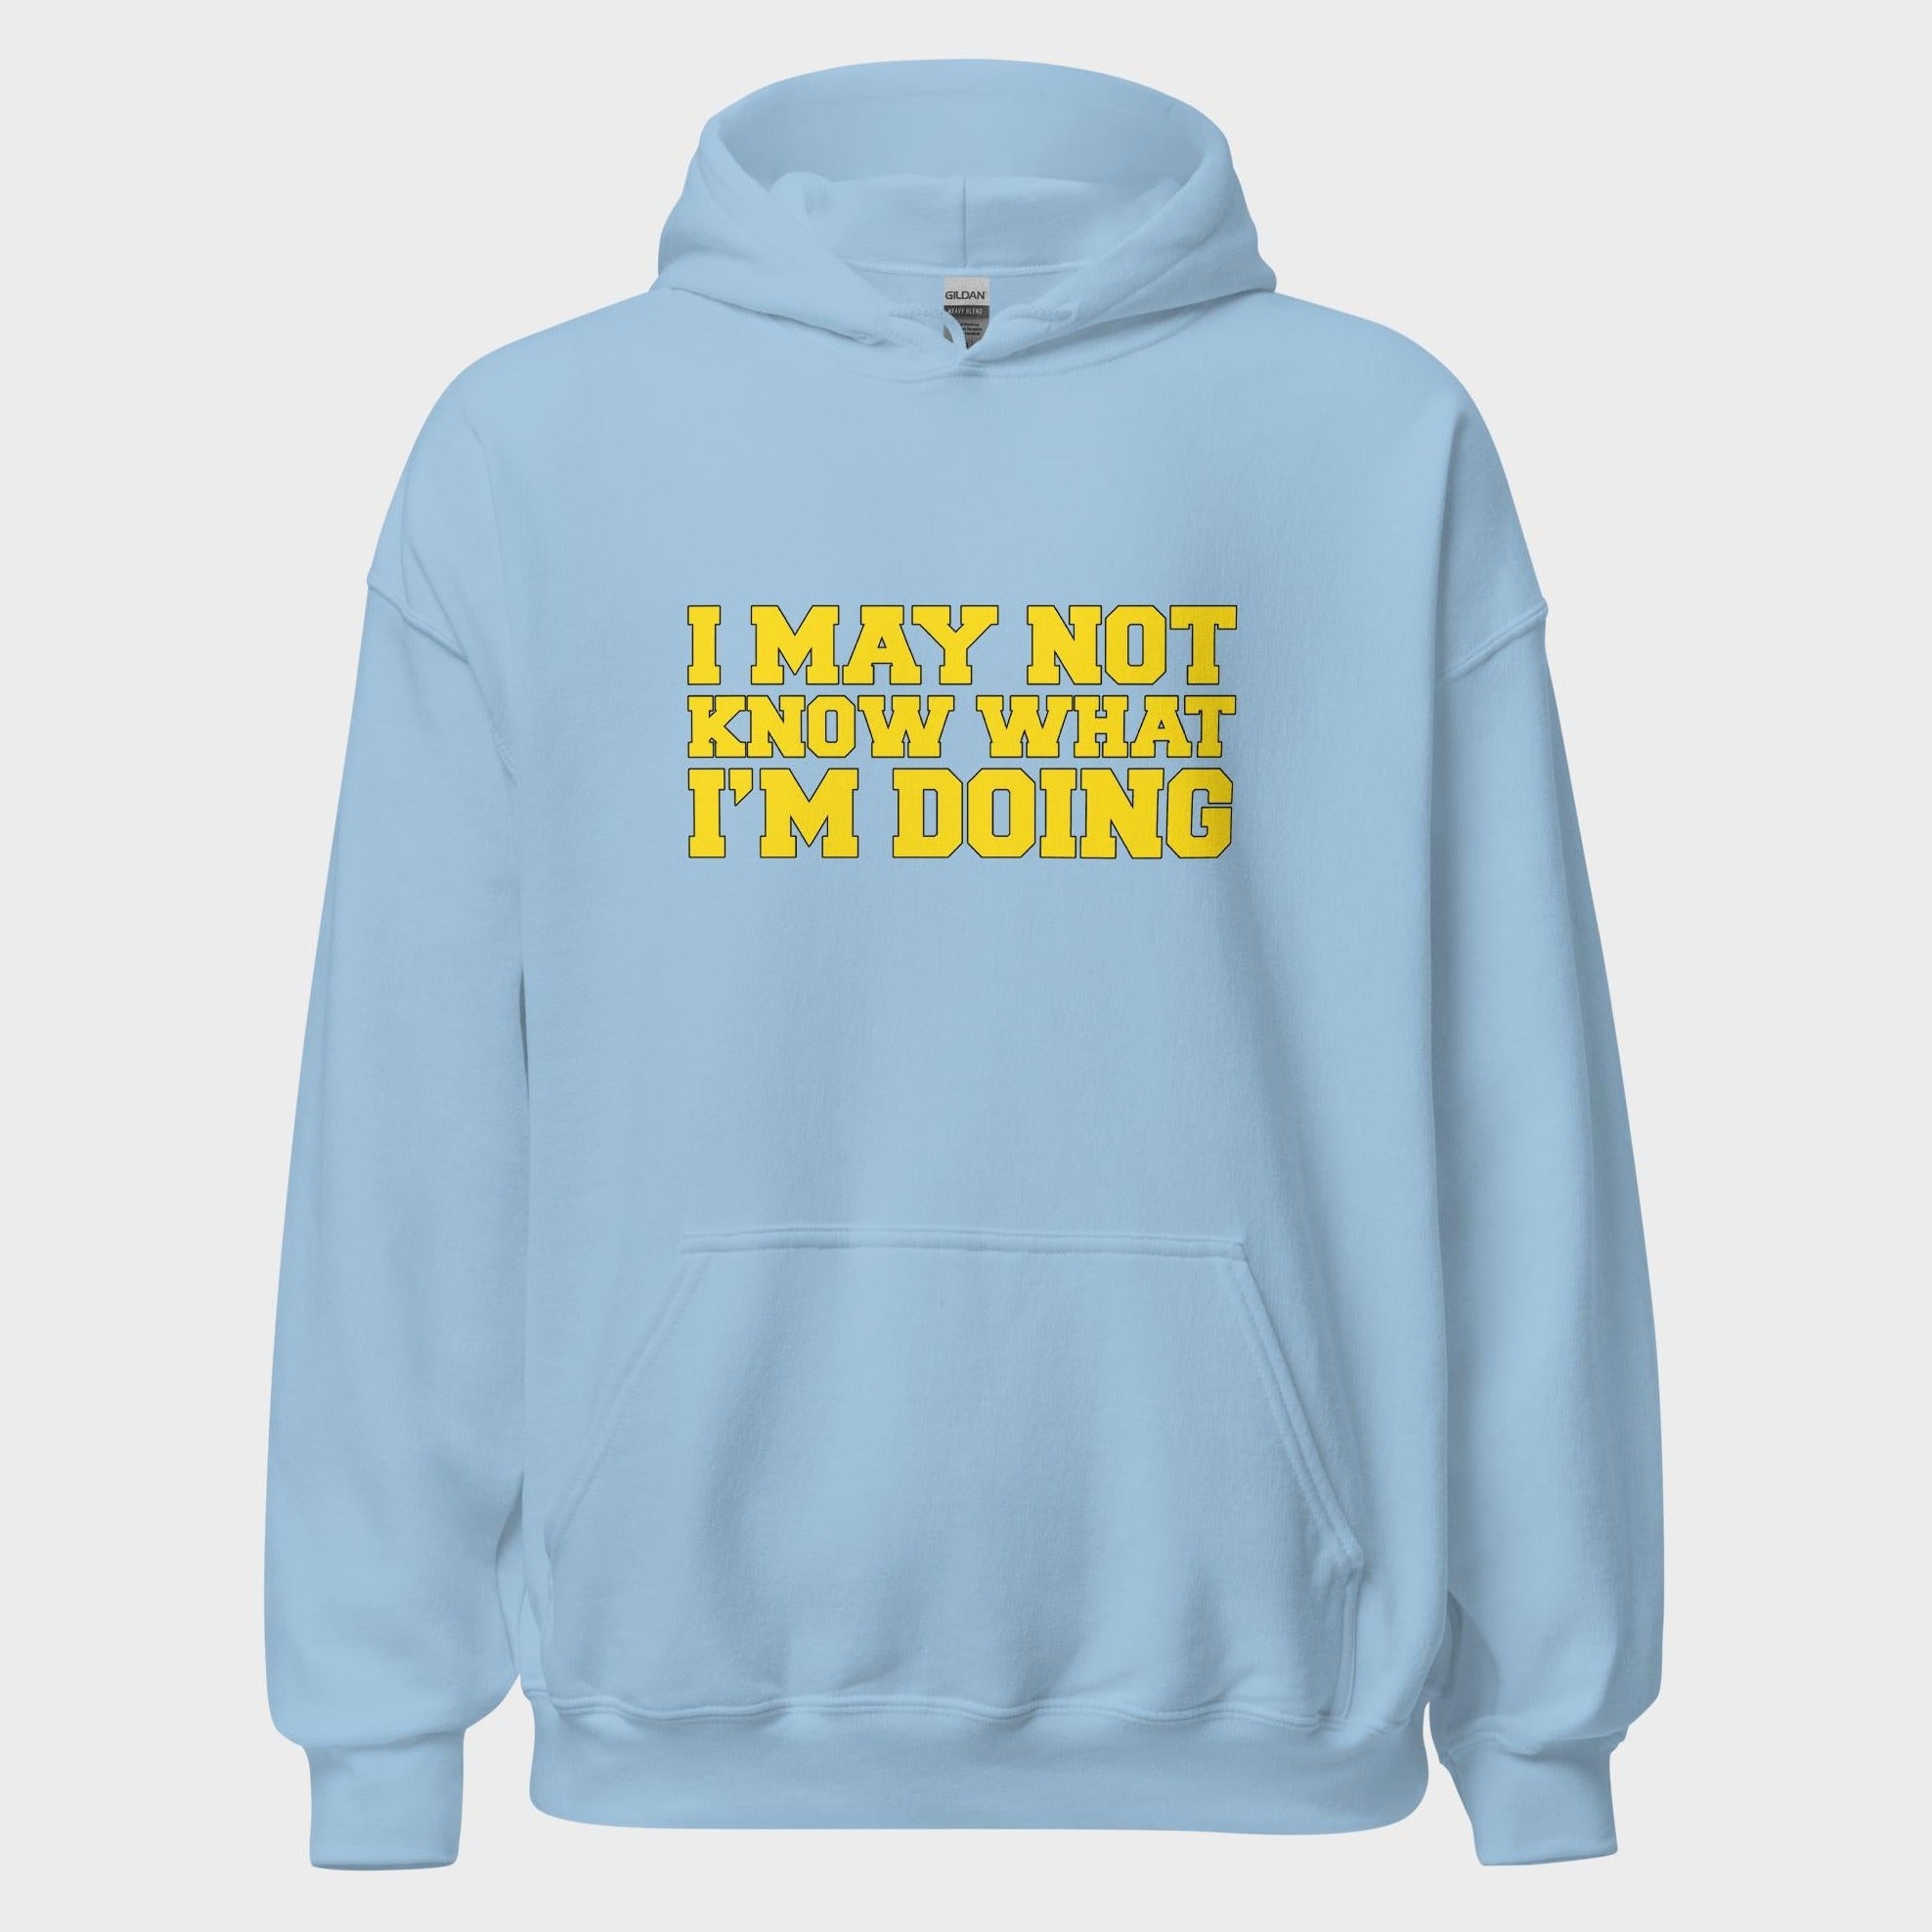 I May Not Know What I'm Doing - Hoodie